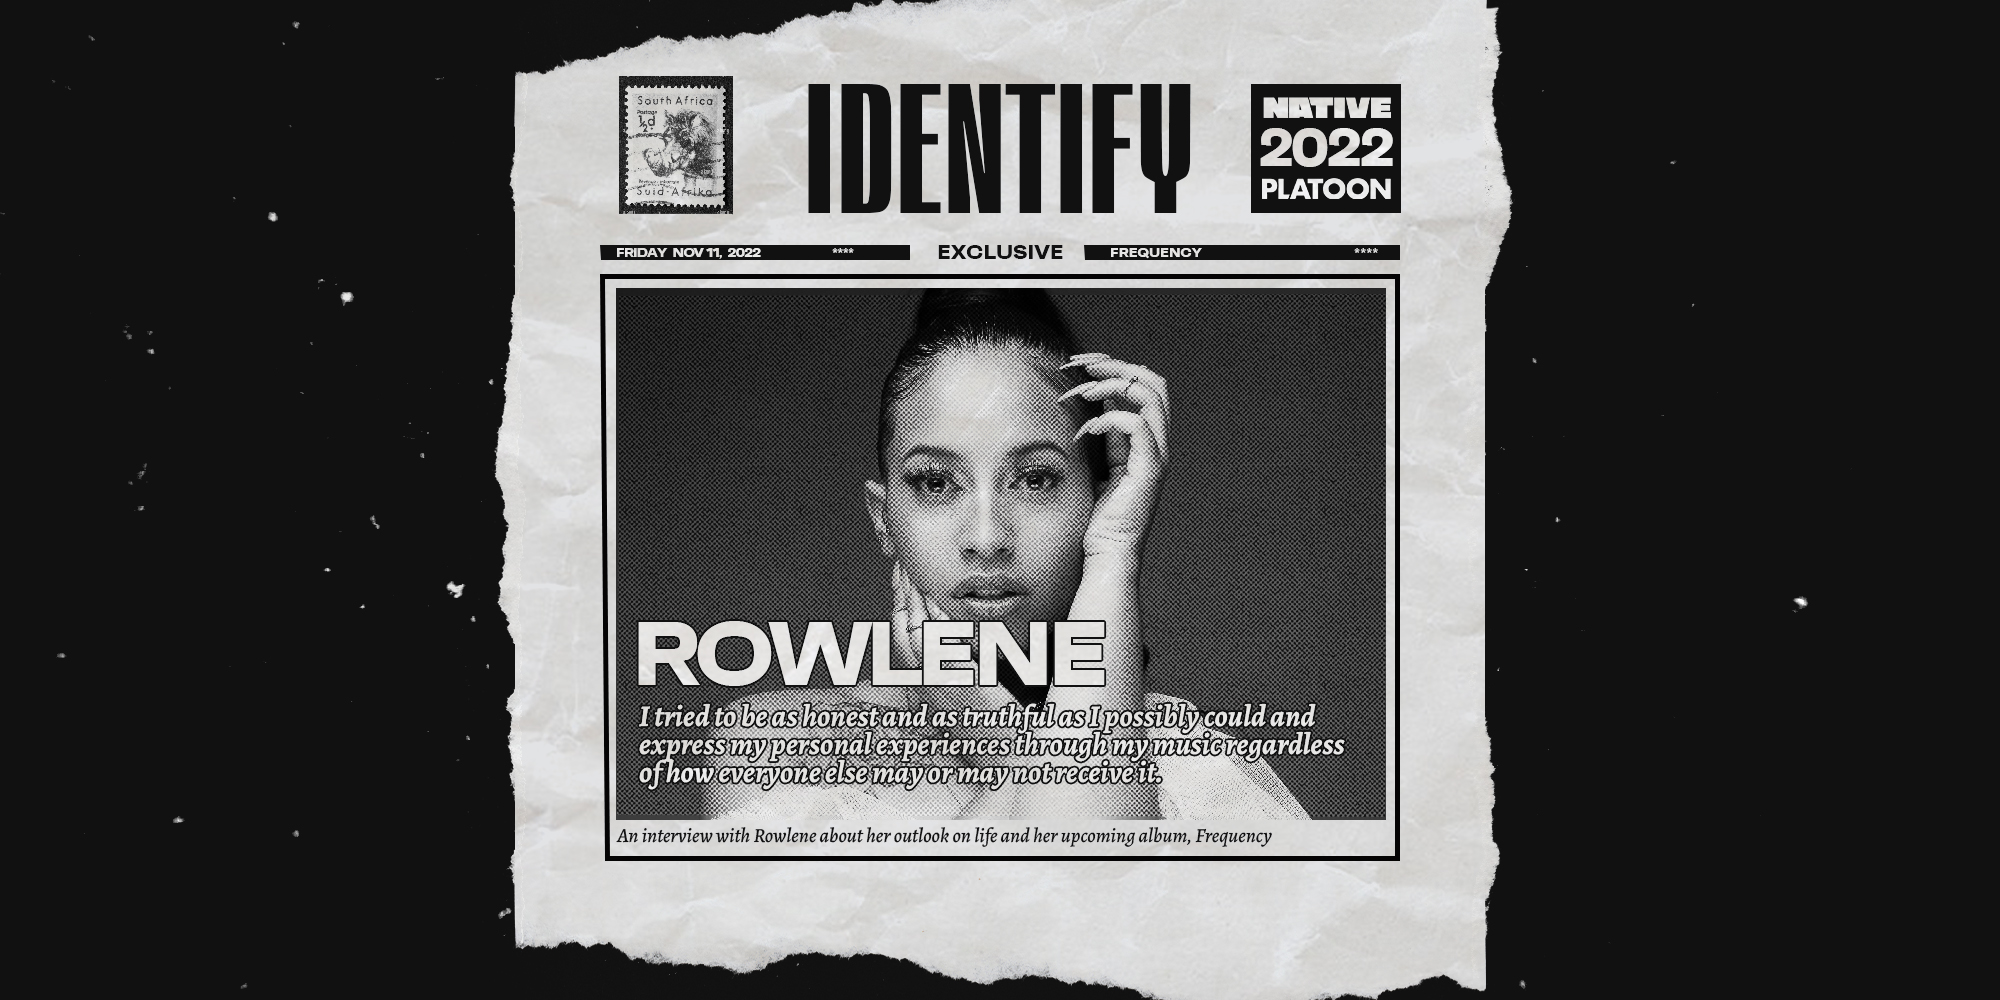 Identify: Rowlene is back, for good this time